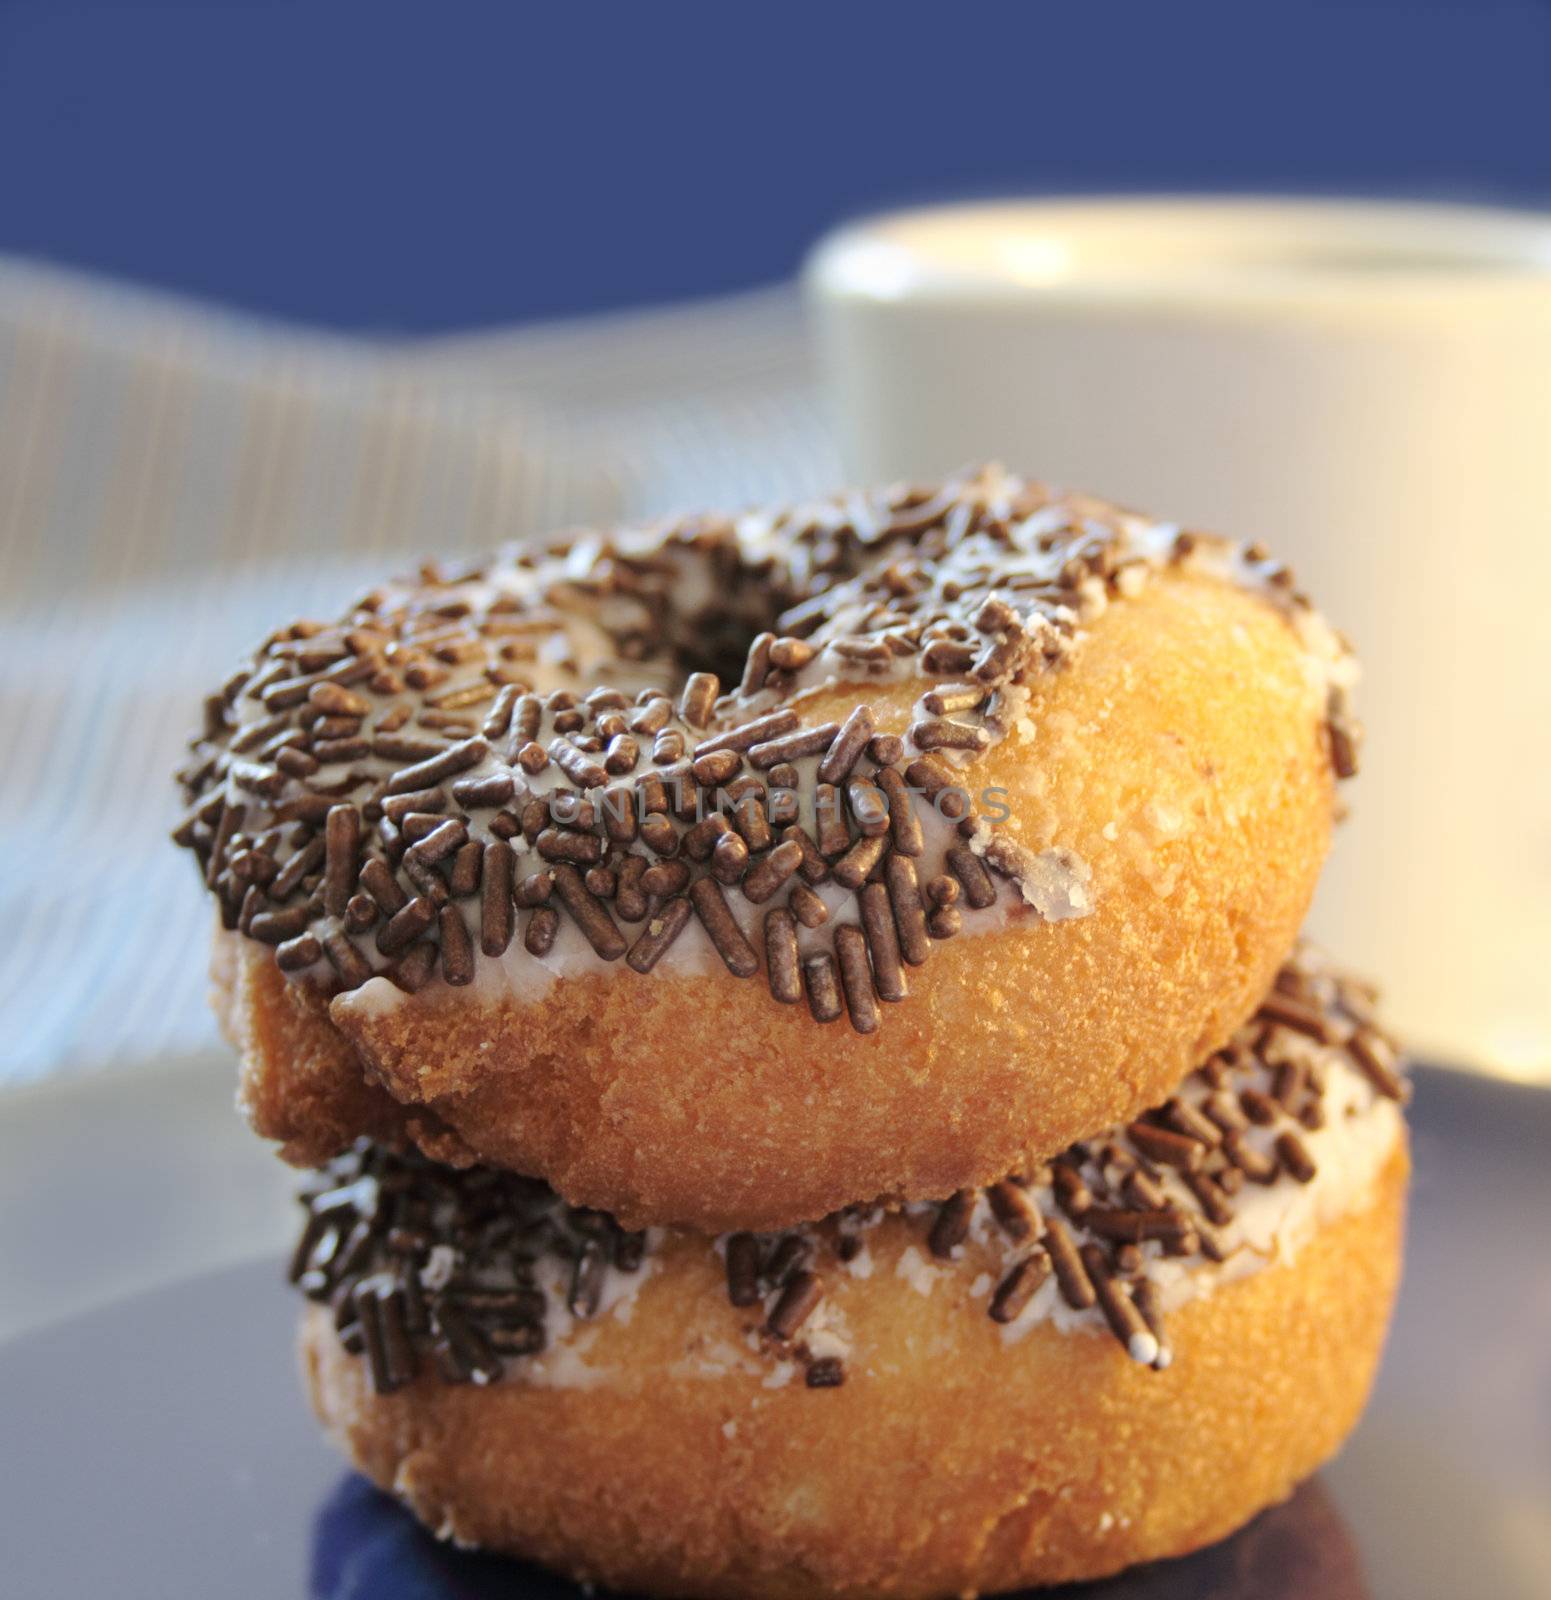 two cake doughnuts with chocolate sprinkles with a white coffee mug in the background